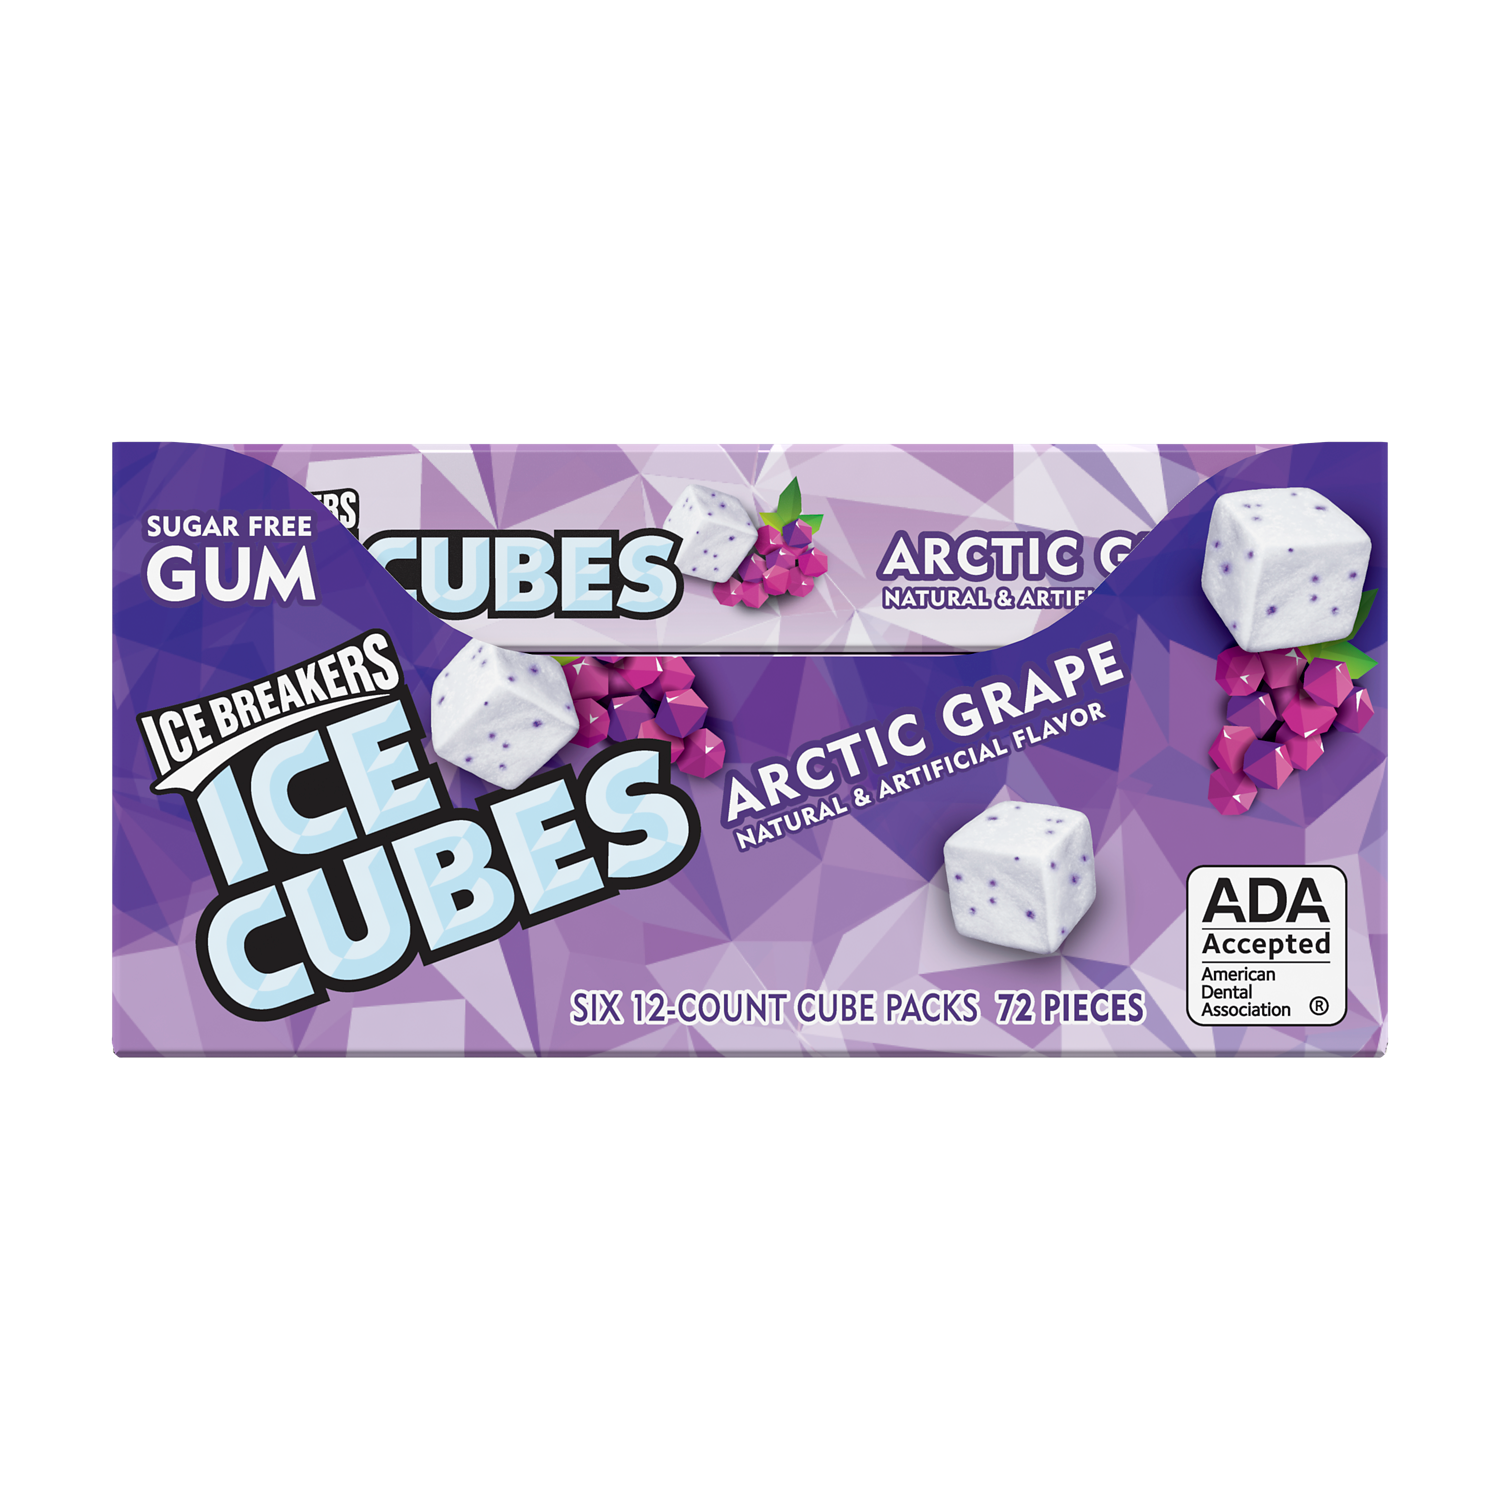 ICE BREAKERS ICE CUBES ARCTIC GRAPE Sugar Free Gum, 0.976 oz box, 12 count - Front of Package